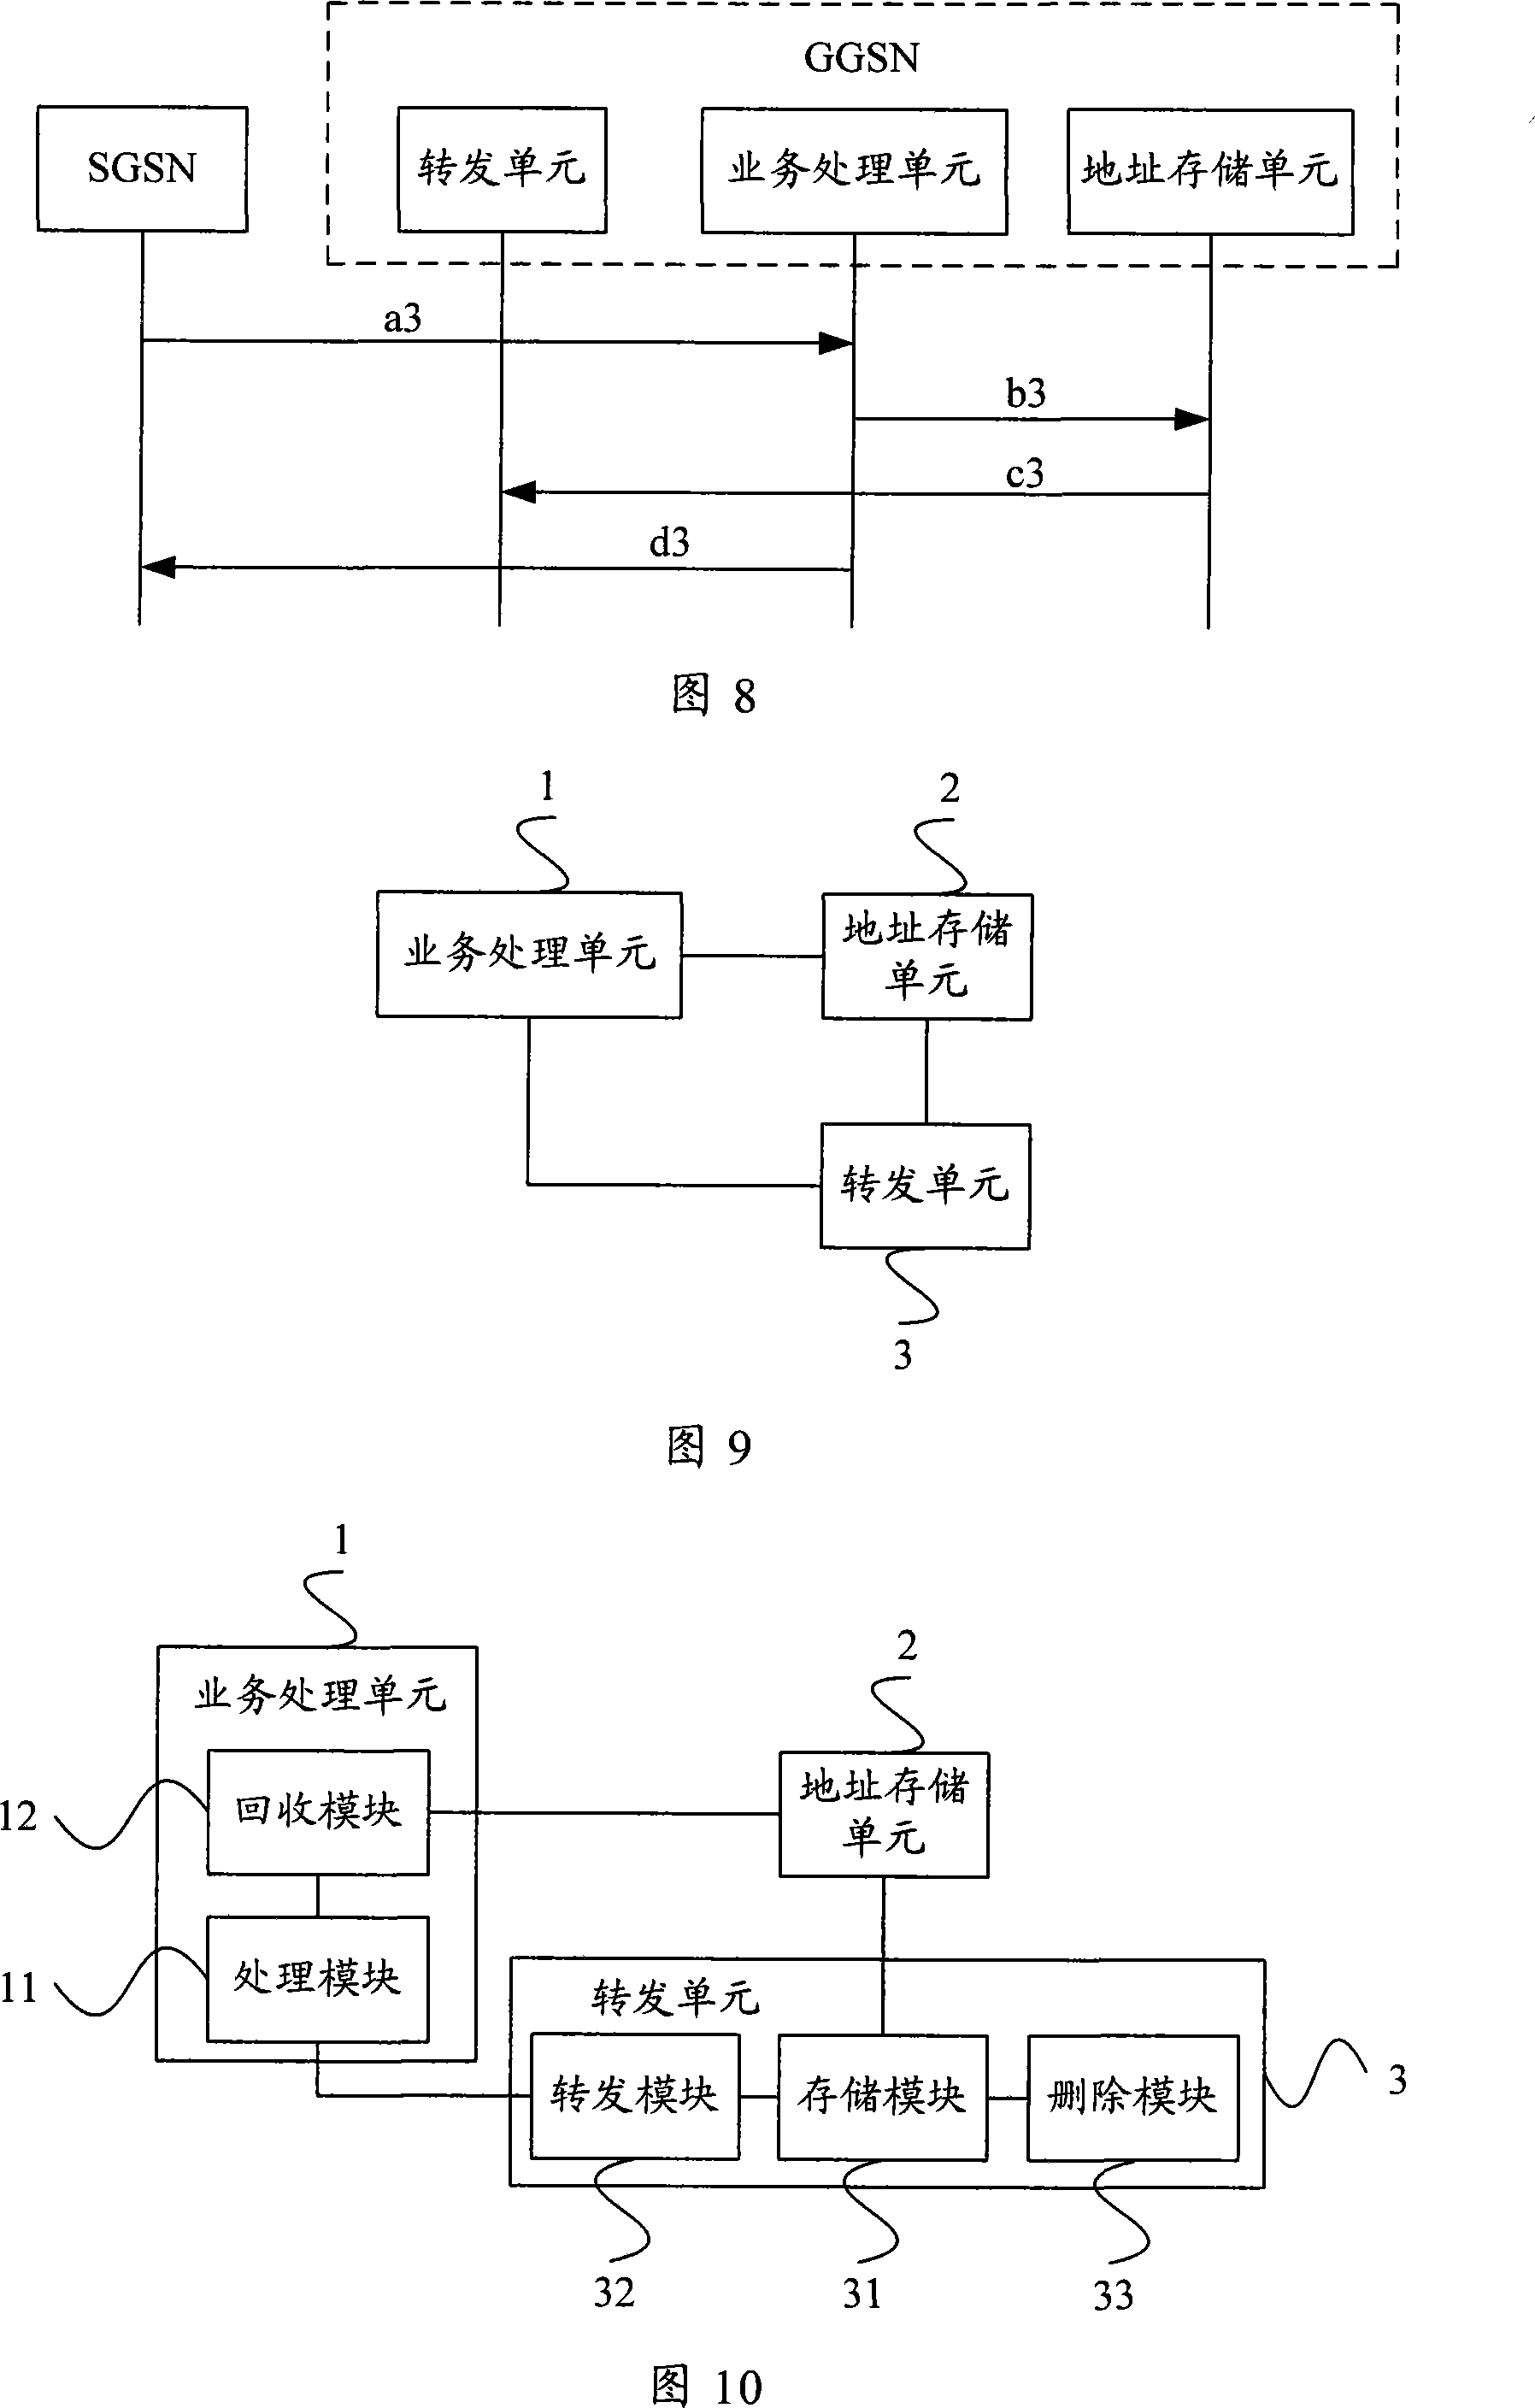 Method and apparatus for establishing route information